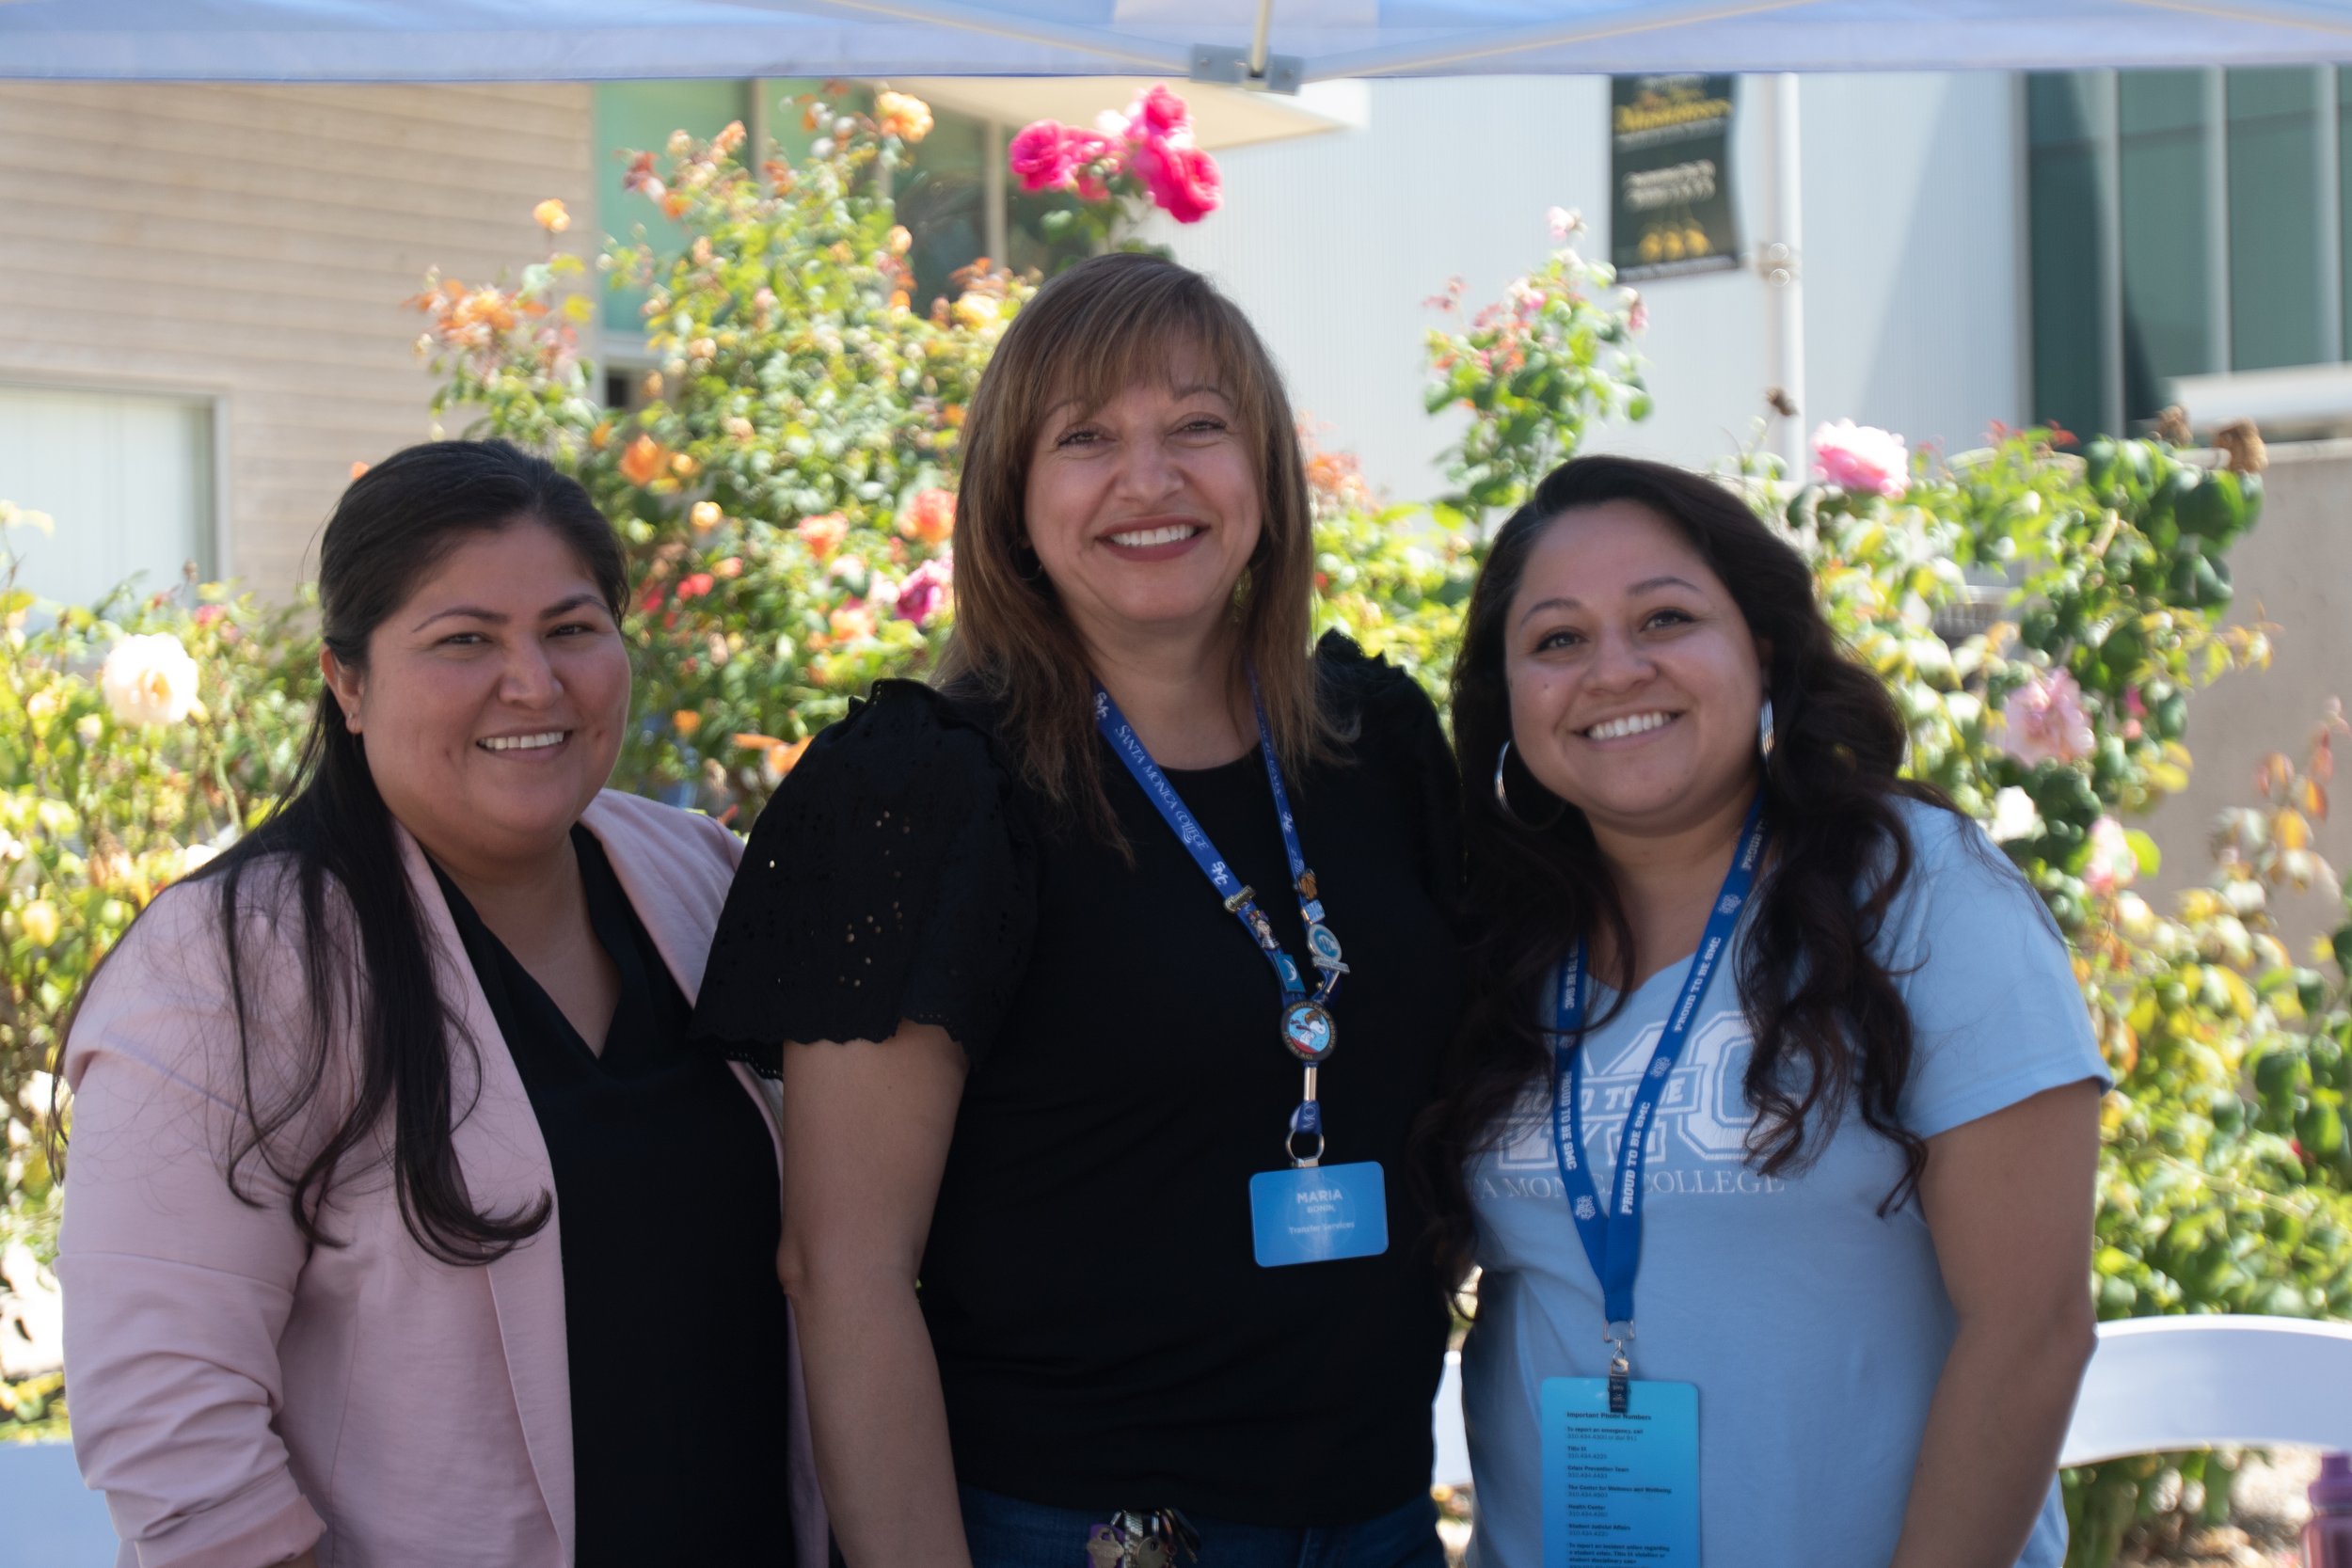  Santa Monica College (SMC) Adjunct Counselor Lupe Cargas, Transfer and Articulation Specialist Maria Bonin and Transfer Completion Counselor Erika Knox at the Counseling booth during the SMC Start Up event on main campus in Santa Monica, Calif., on 